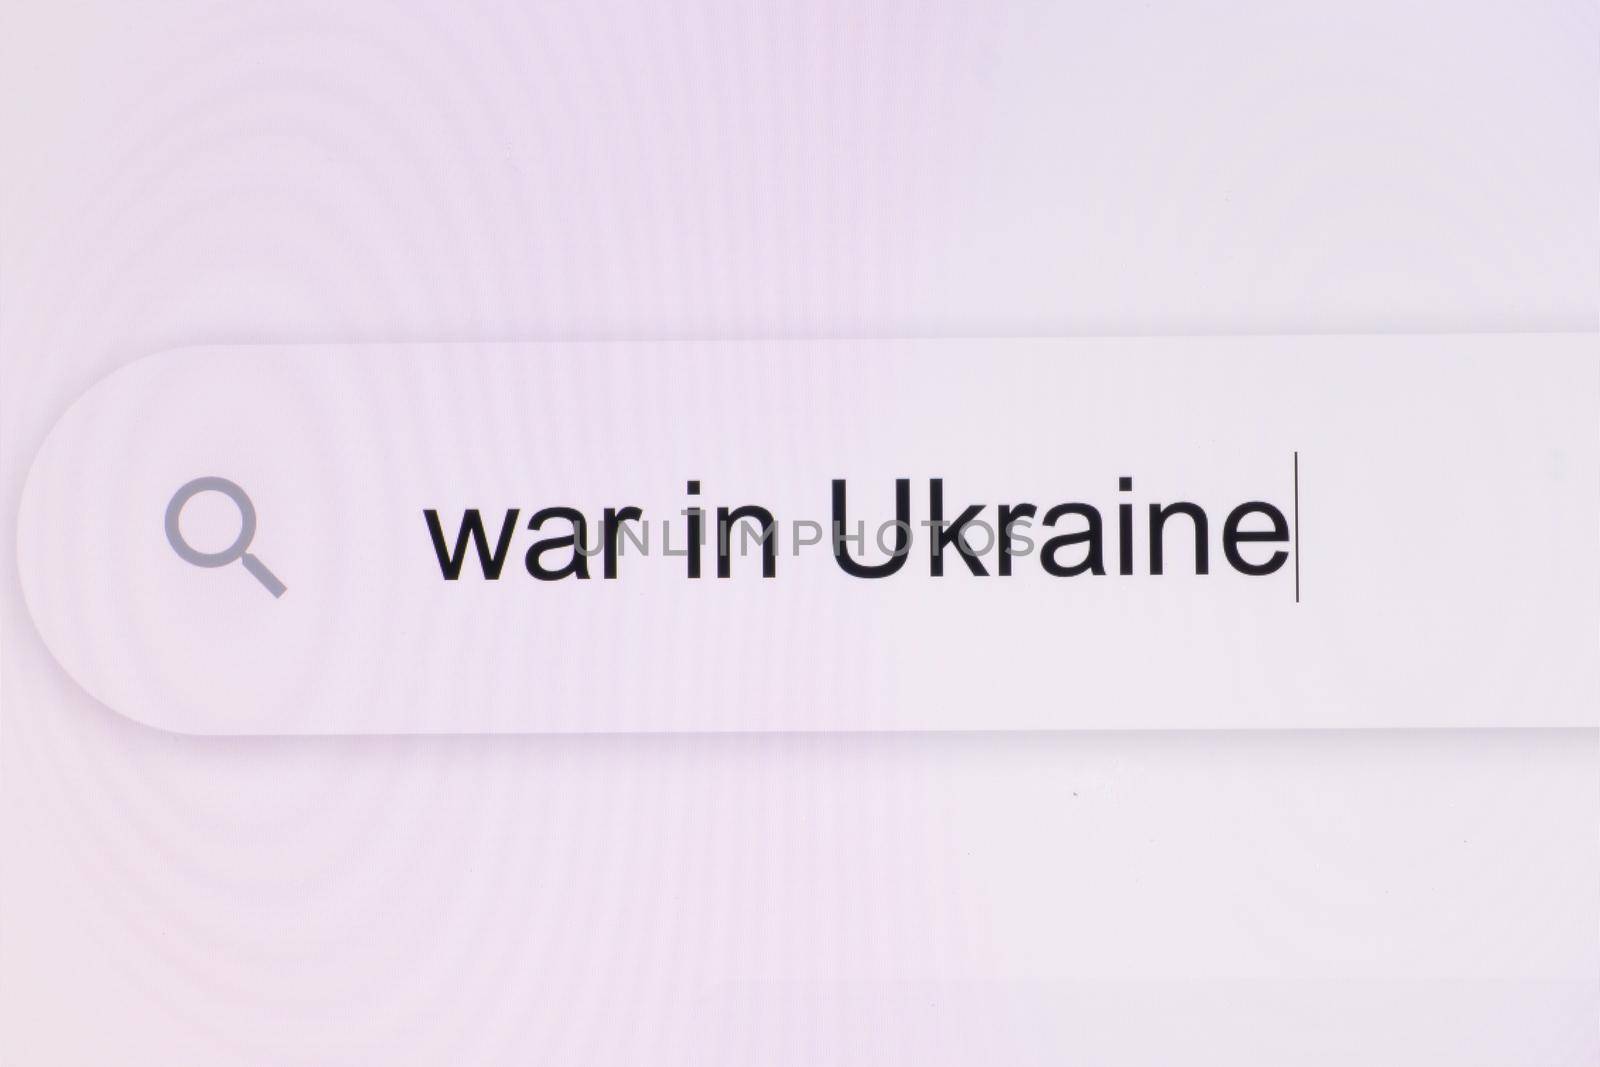 War in Ukraine animated headline of news outlets around the world. Russian Federation attacked Ukraine. War in Ukraine - Internet browser search bar question typing war related question by uflypro